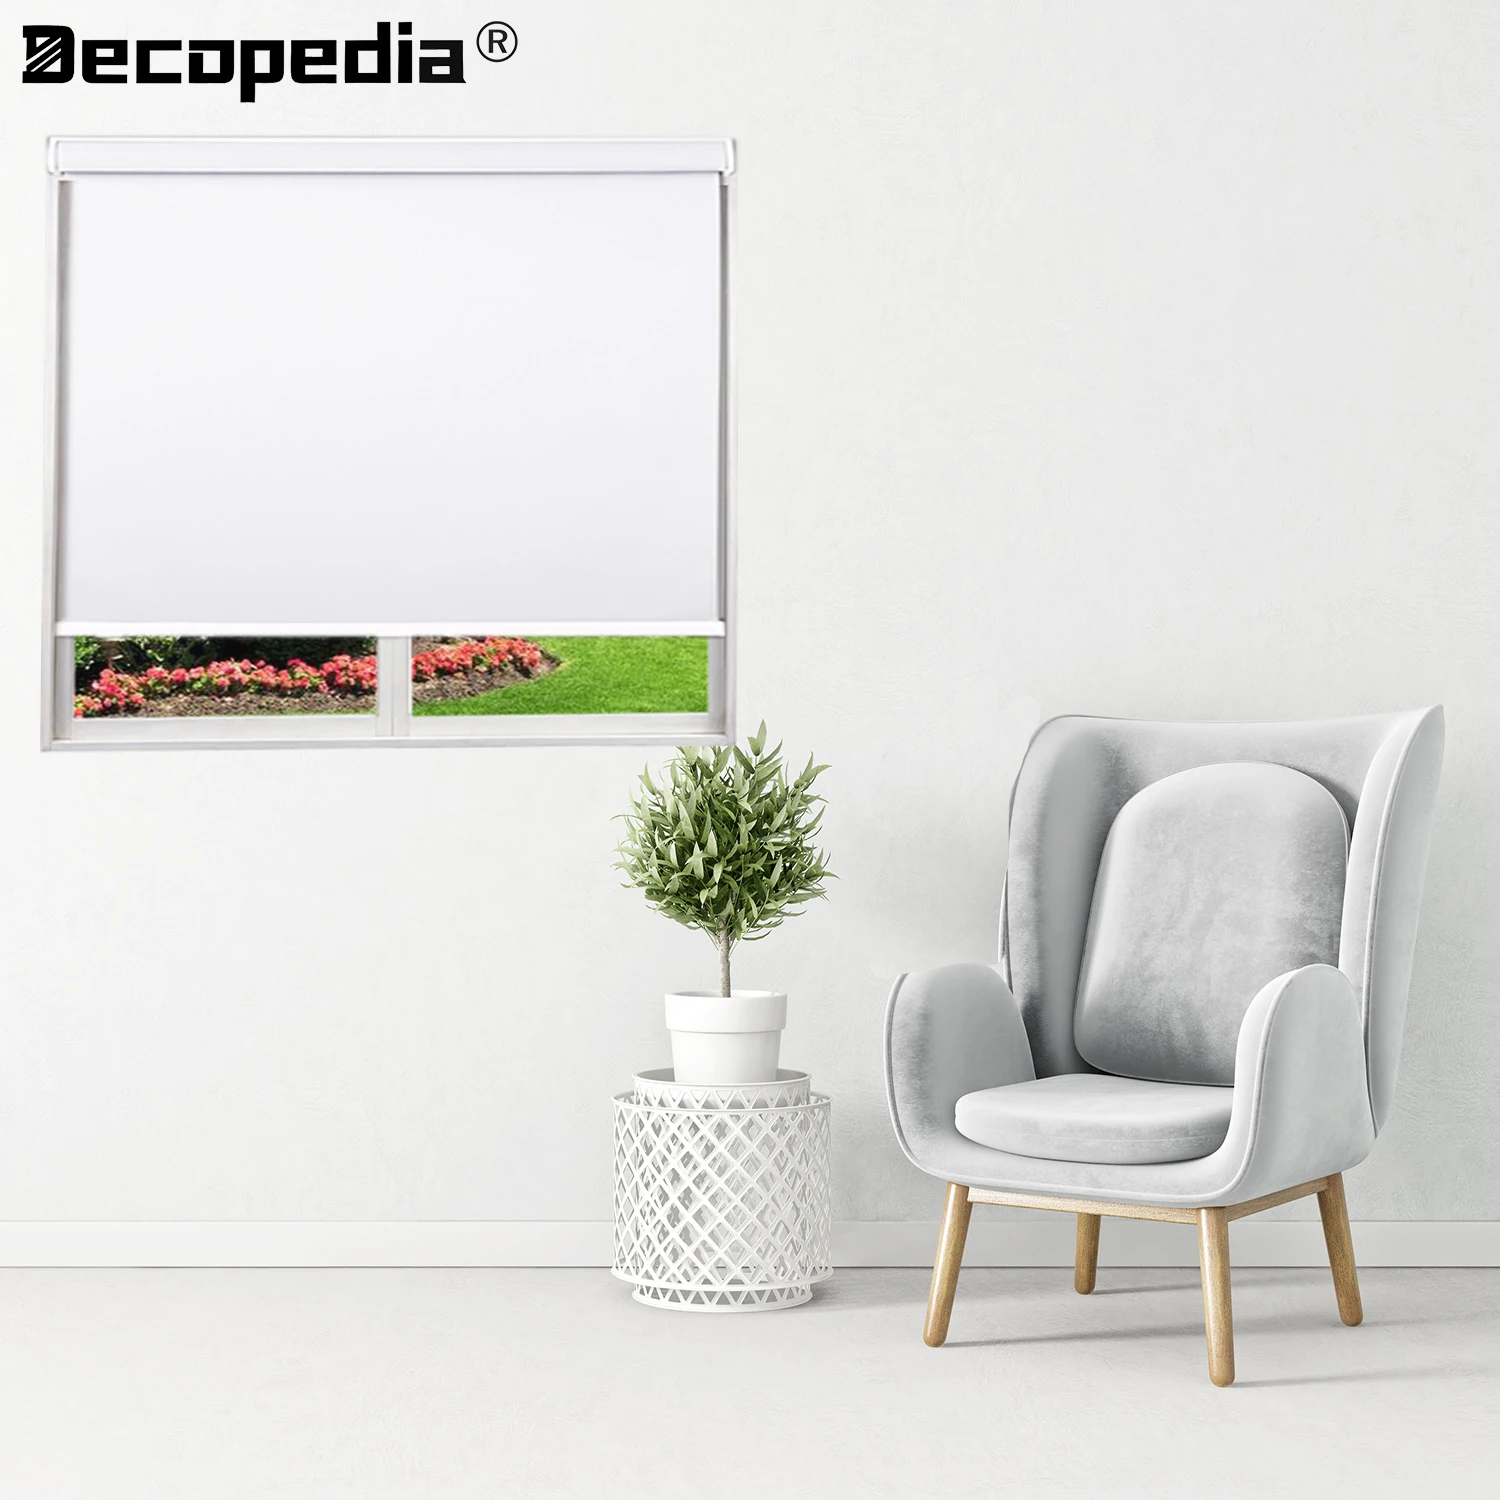 Decopedia Roller Blinds for Windows Motorized Cordless Smart Window Blinds Blackout Roller Day and Night Curtain for Living Room